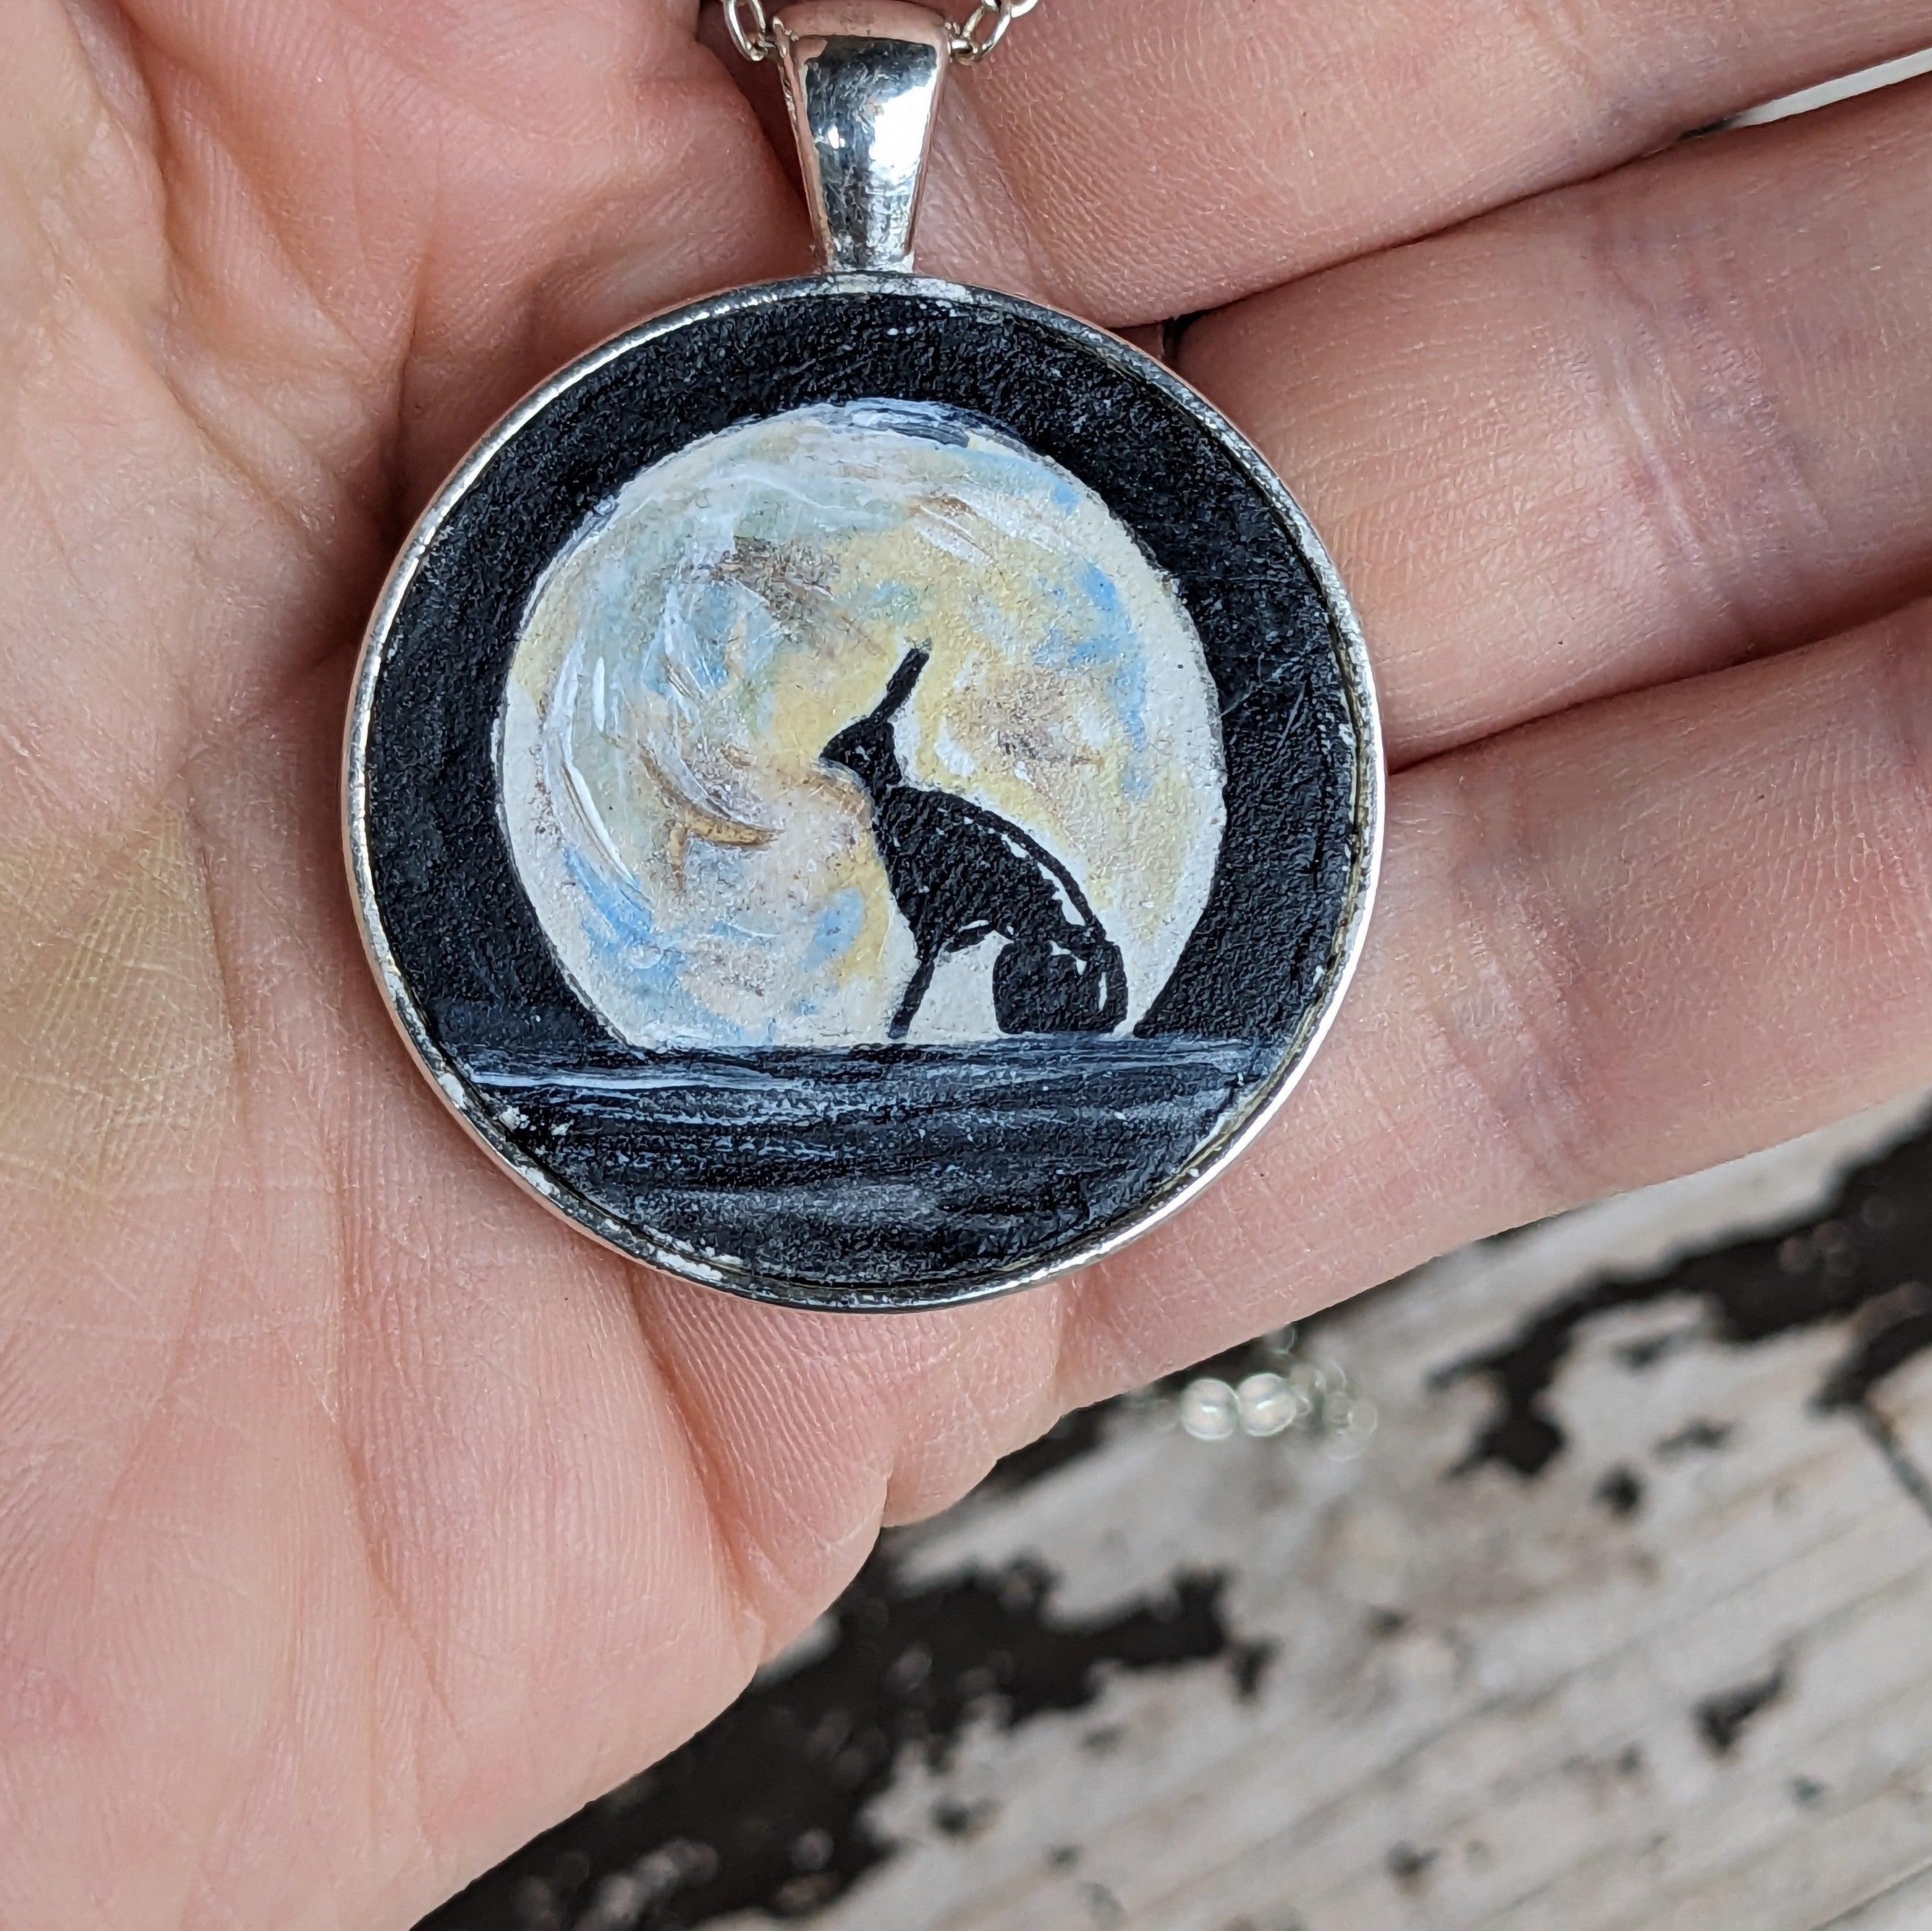 Hare in Moonlight Painted Necklace